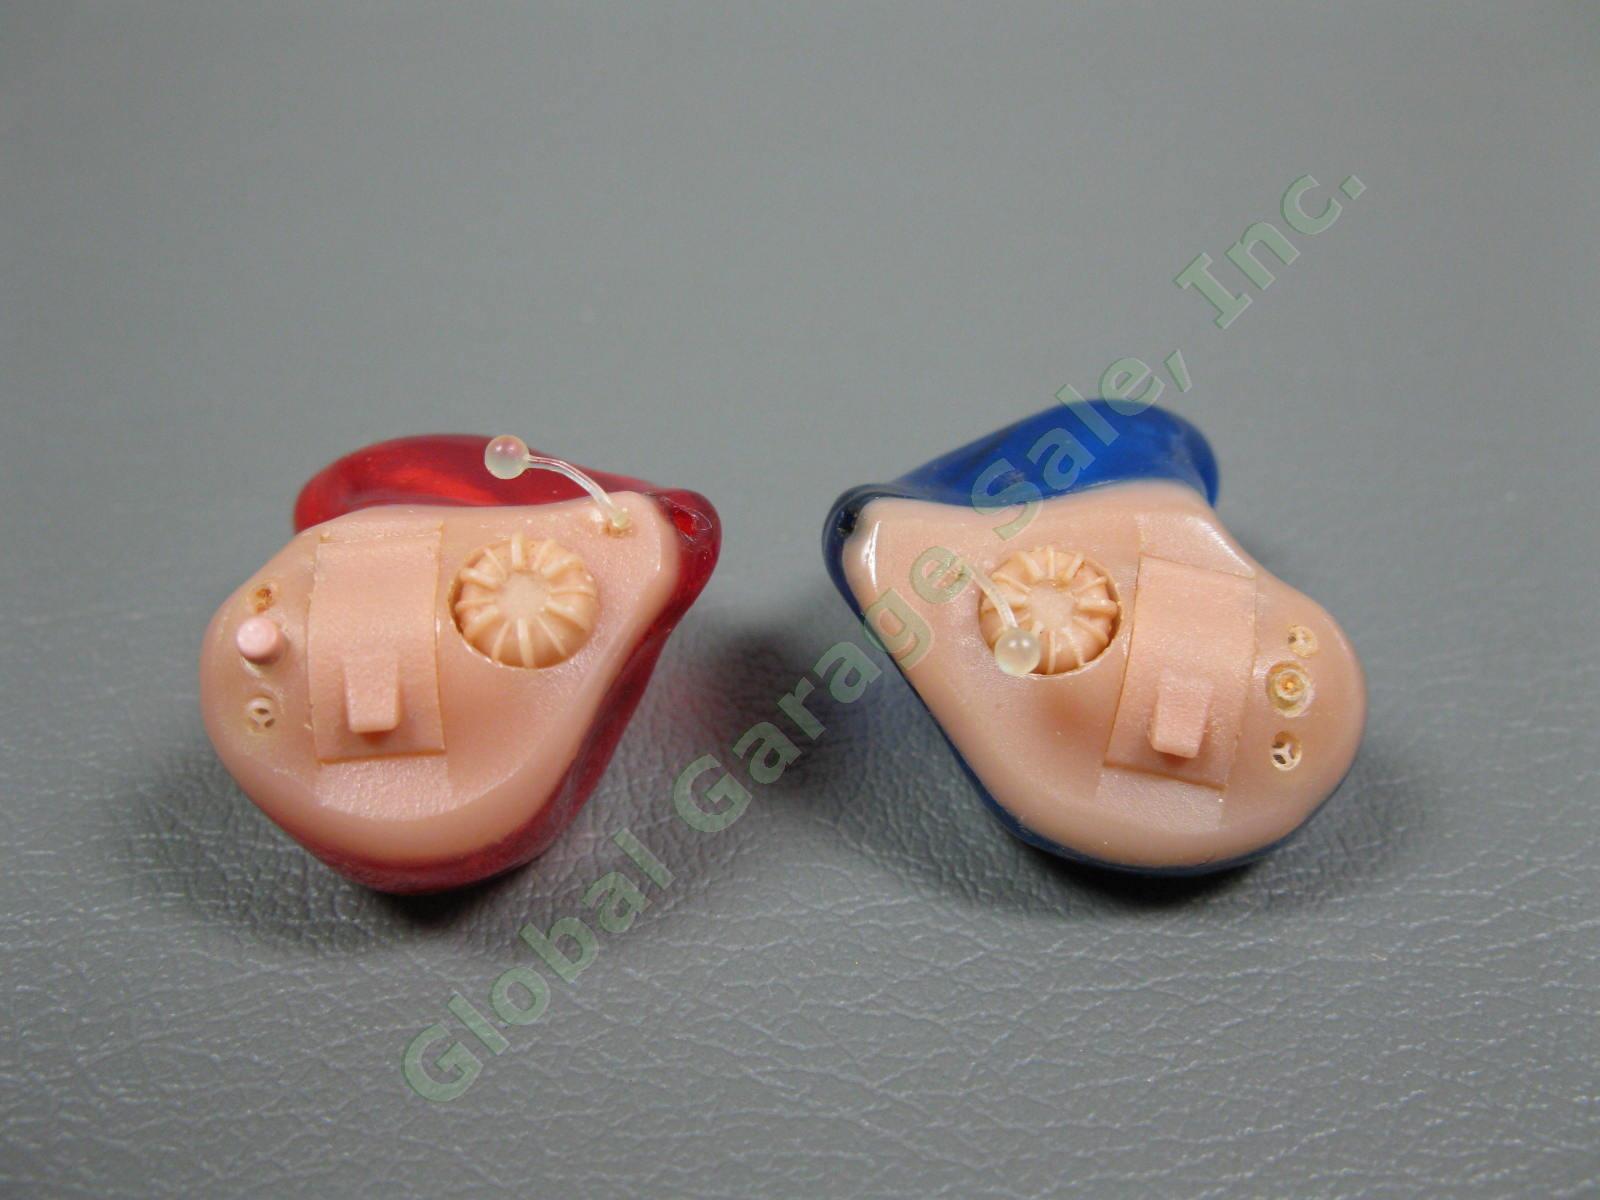 Unitron Quantum FS Hearing Aid Left Right ITE Pair 1229J0K5 In-The-Ear Working 2